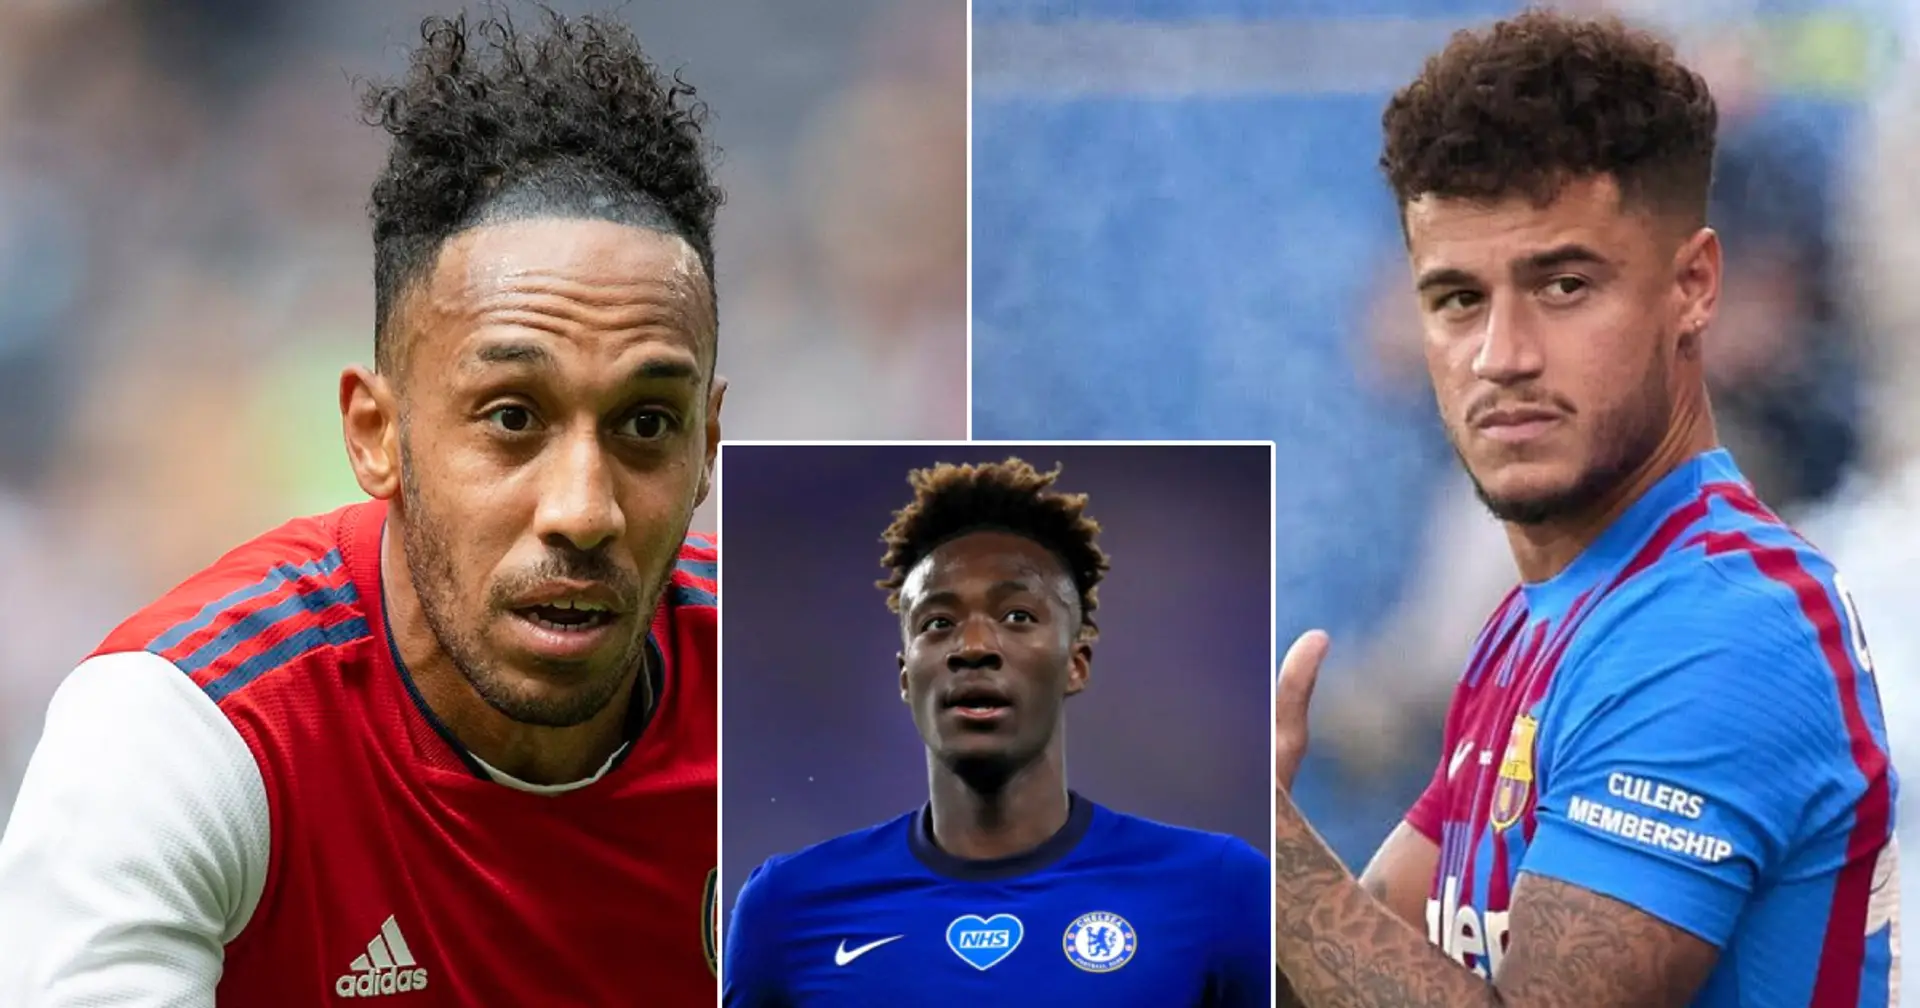 Barcelona to offer Coutinho to Arsenal for Aubameyang, tried to sign Chelsea's Abraham (reliability: 5 stars)